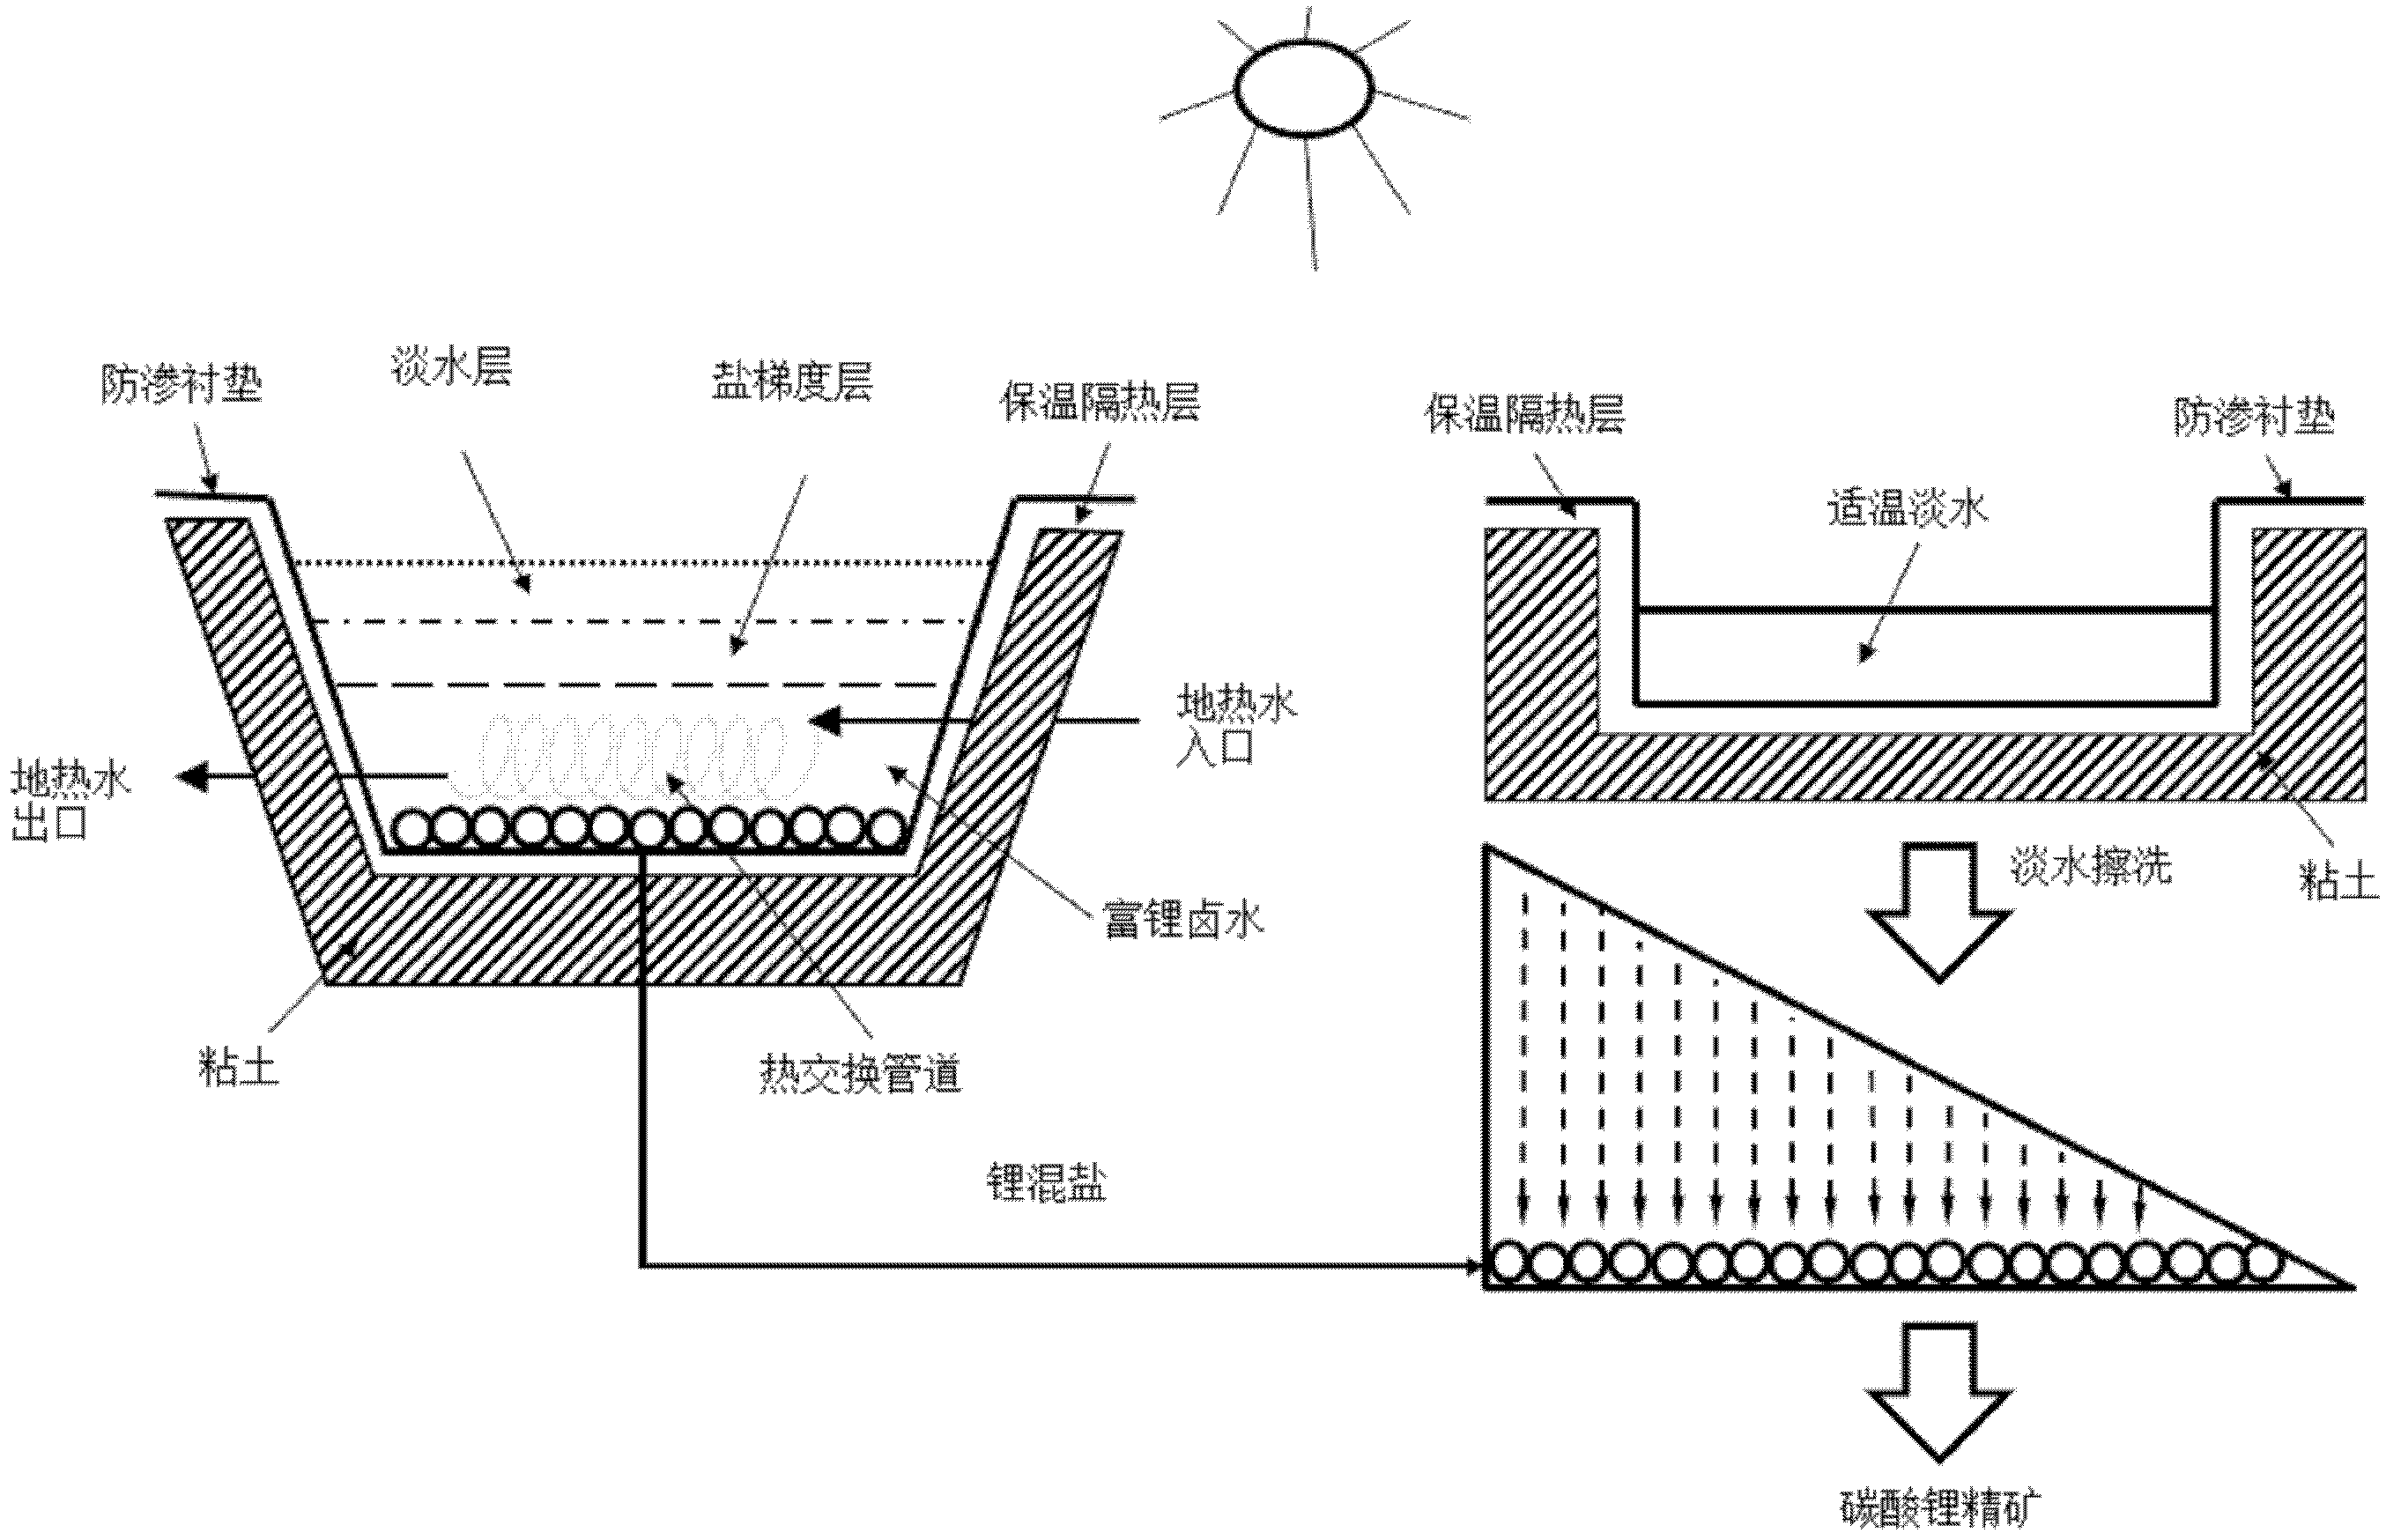 Method for extracting lithium carbonate from carbonate brine